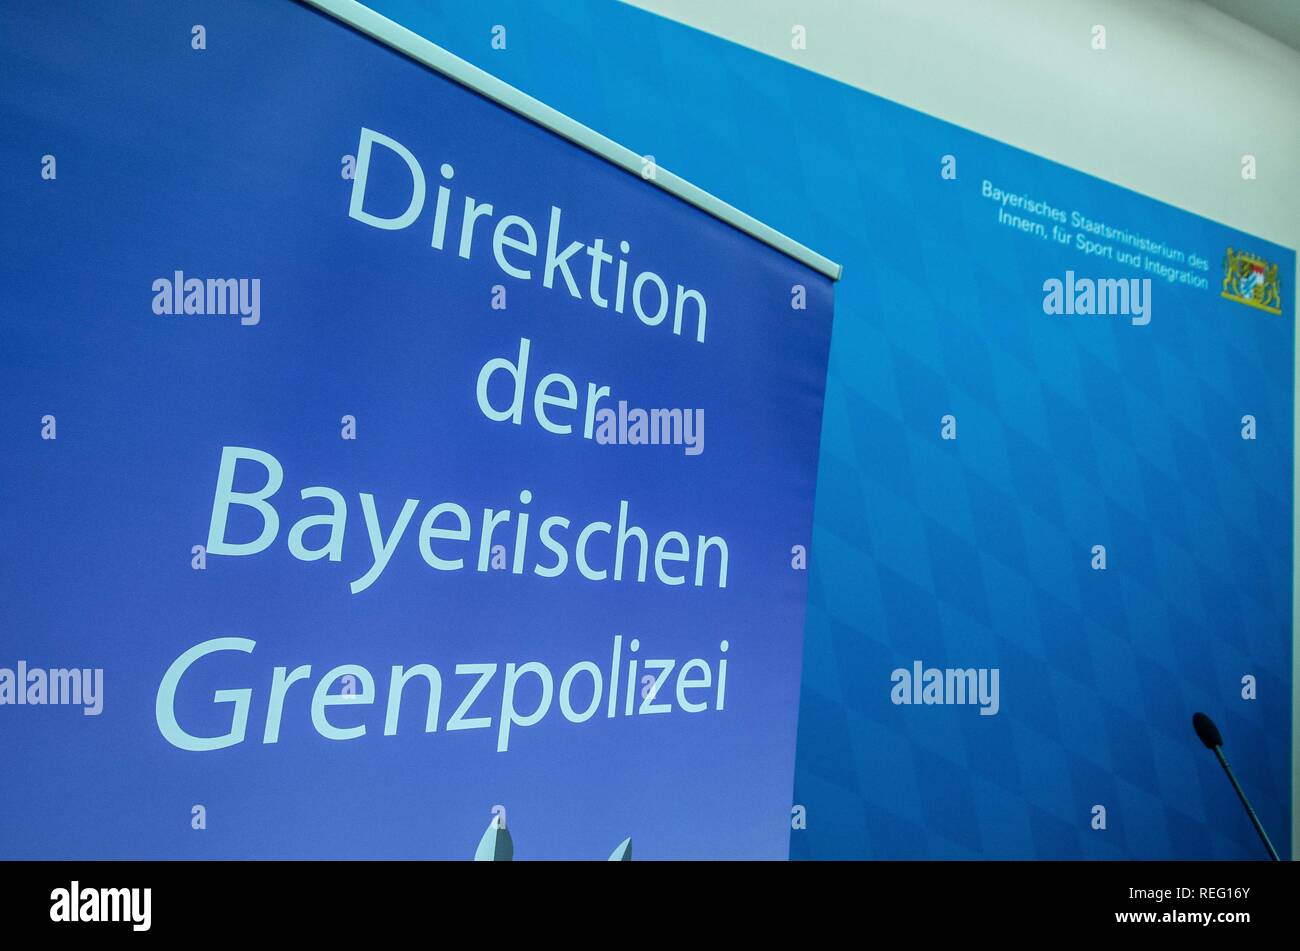 Munich, Bavaria, Germany. 21st Jan, 2019. The Bavarian Innenminister Joachim Herrmann and the Direktor der Bayerischen Grenzpolizei Alois Mannichl presented the half year statistics of the controversial border police (Grenzpolizei) that operates at the border crossings between Germany and Austria. Herrmann announced plans to double the border protection police by 2023.ment including endoscopes for detection of smuggled items. The Grenzschutzpolizei was originally created by Bavaria's CSU in response to the Migrant Crisis, despite Credit: ZUMA Press, Inc./Alamy Live News Stock Photo